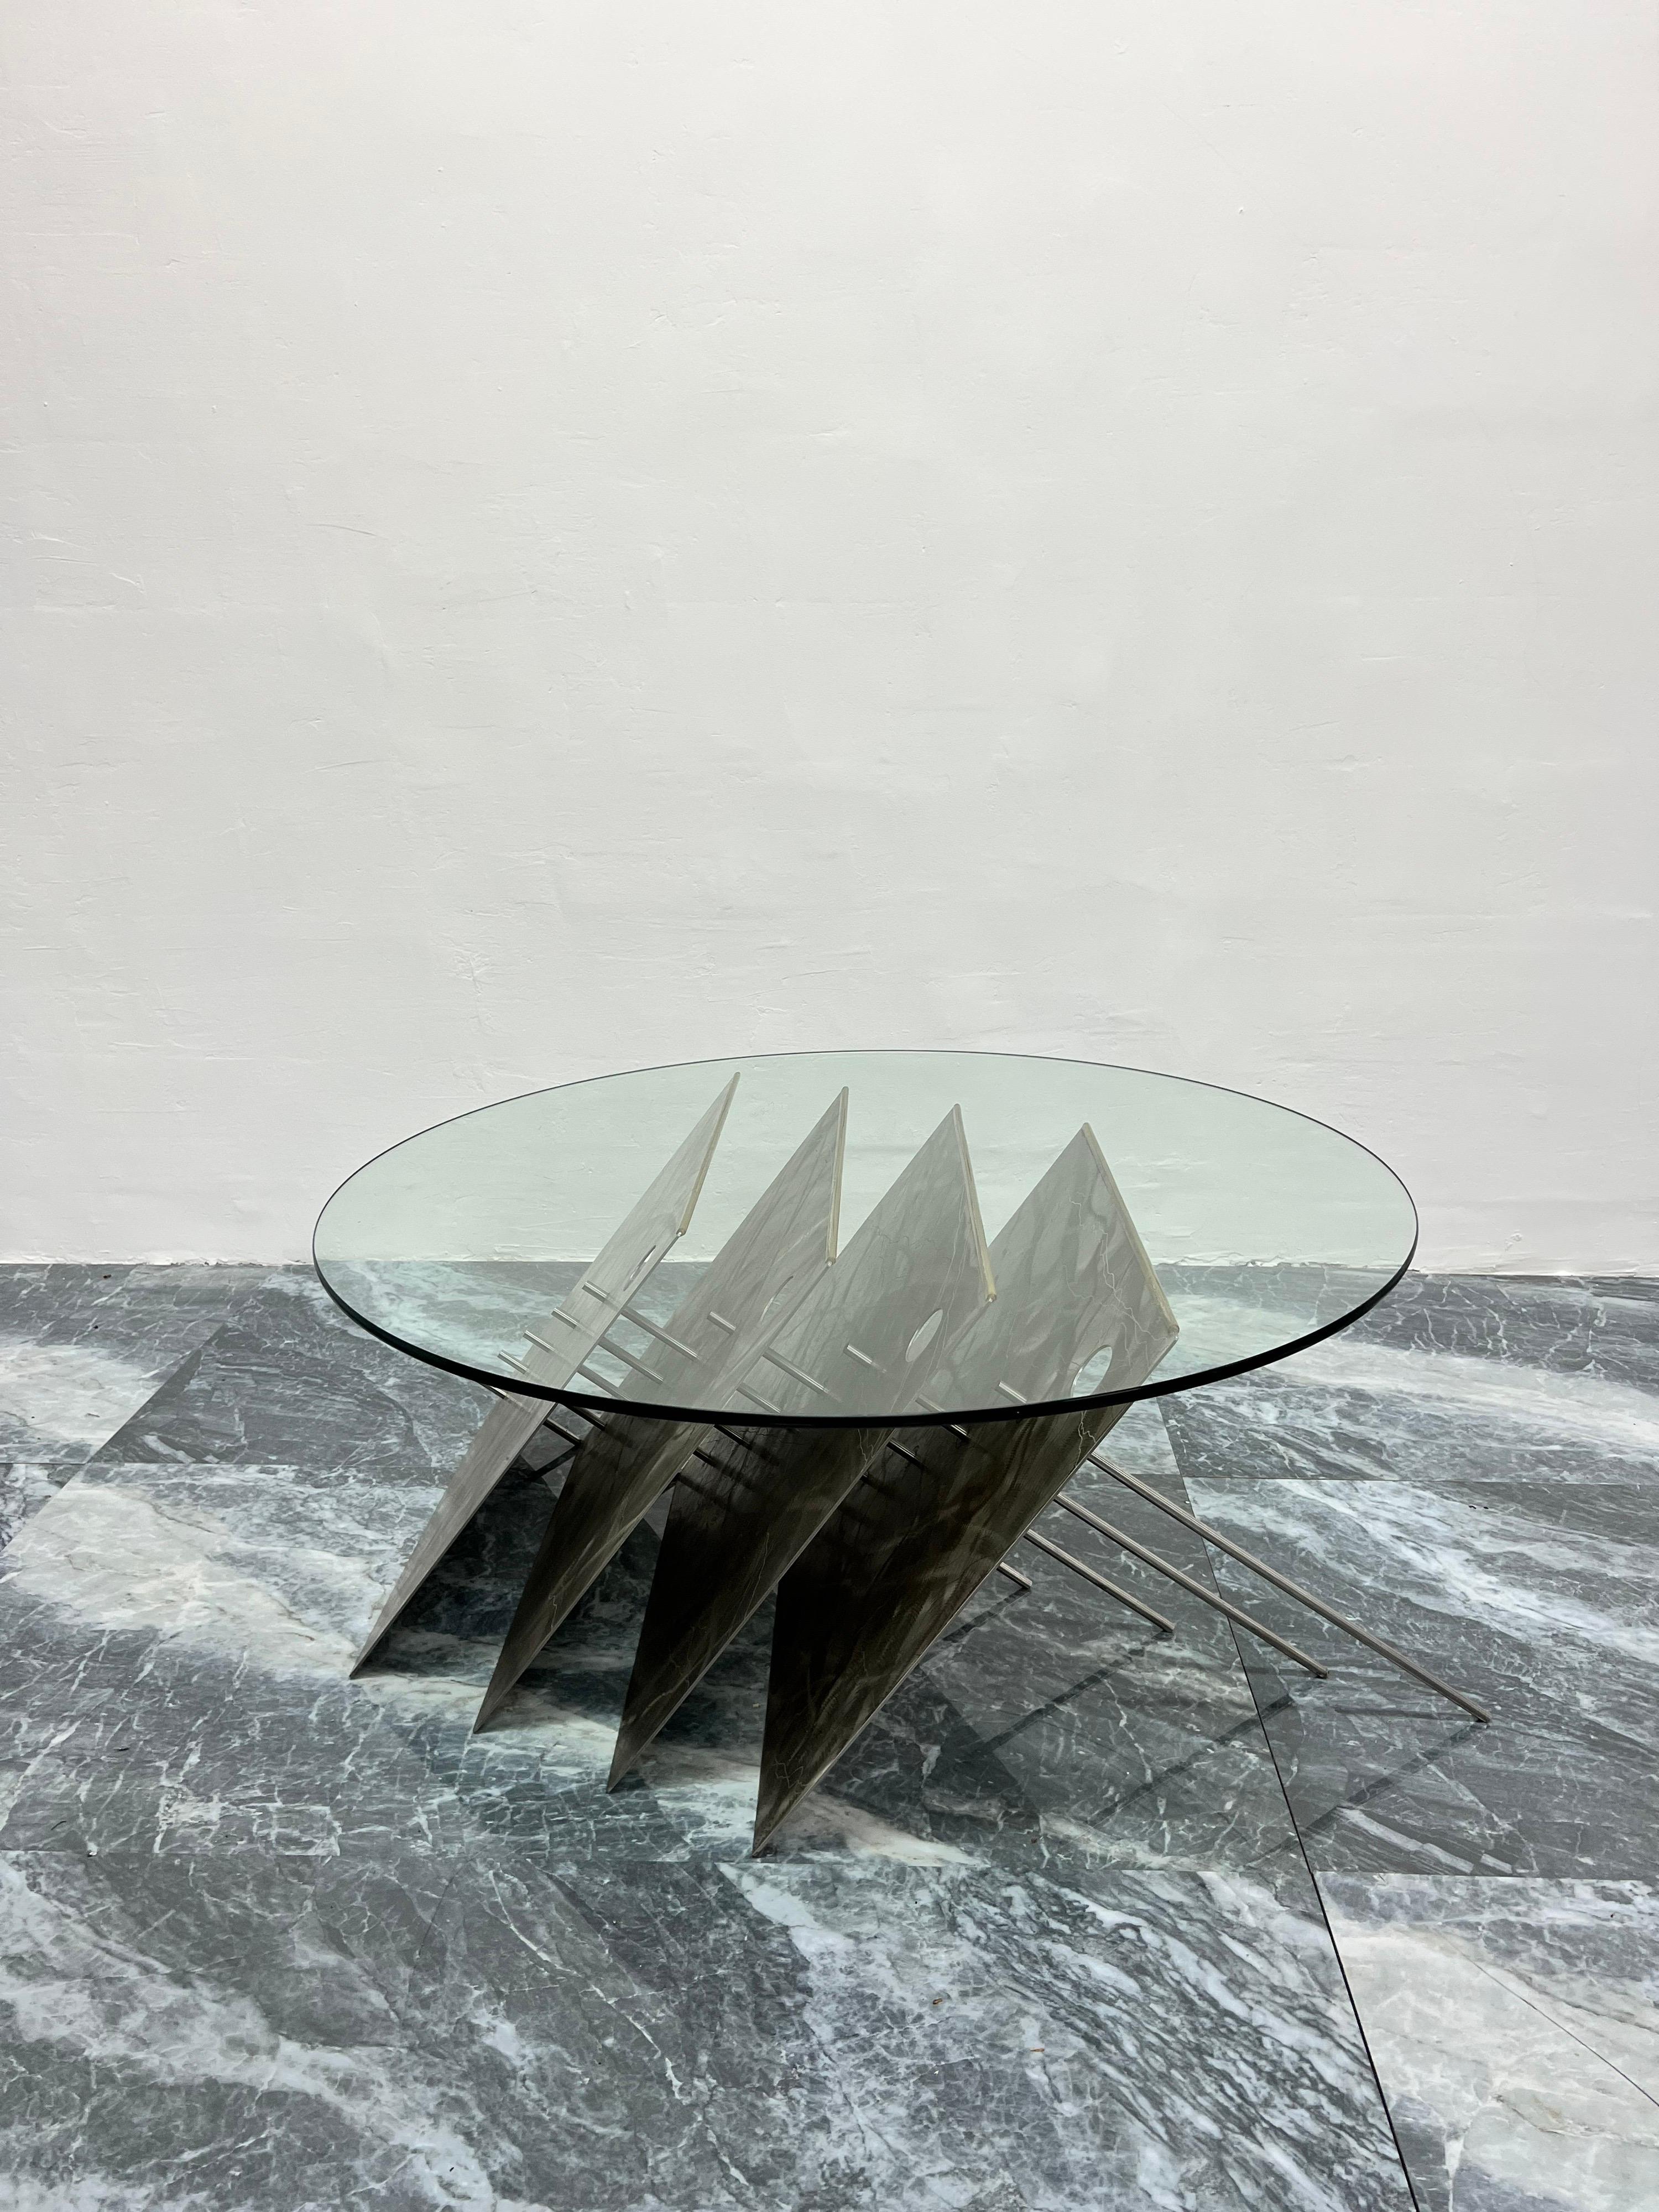 20th Century American Contemporary Custom Made Steel and Glass Art Coffee Table, USA 1990s For Sale